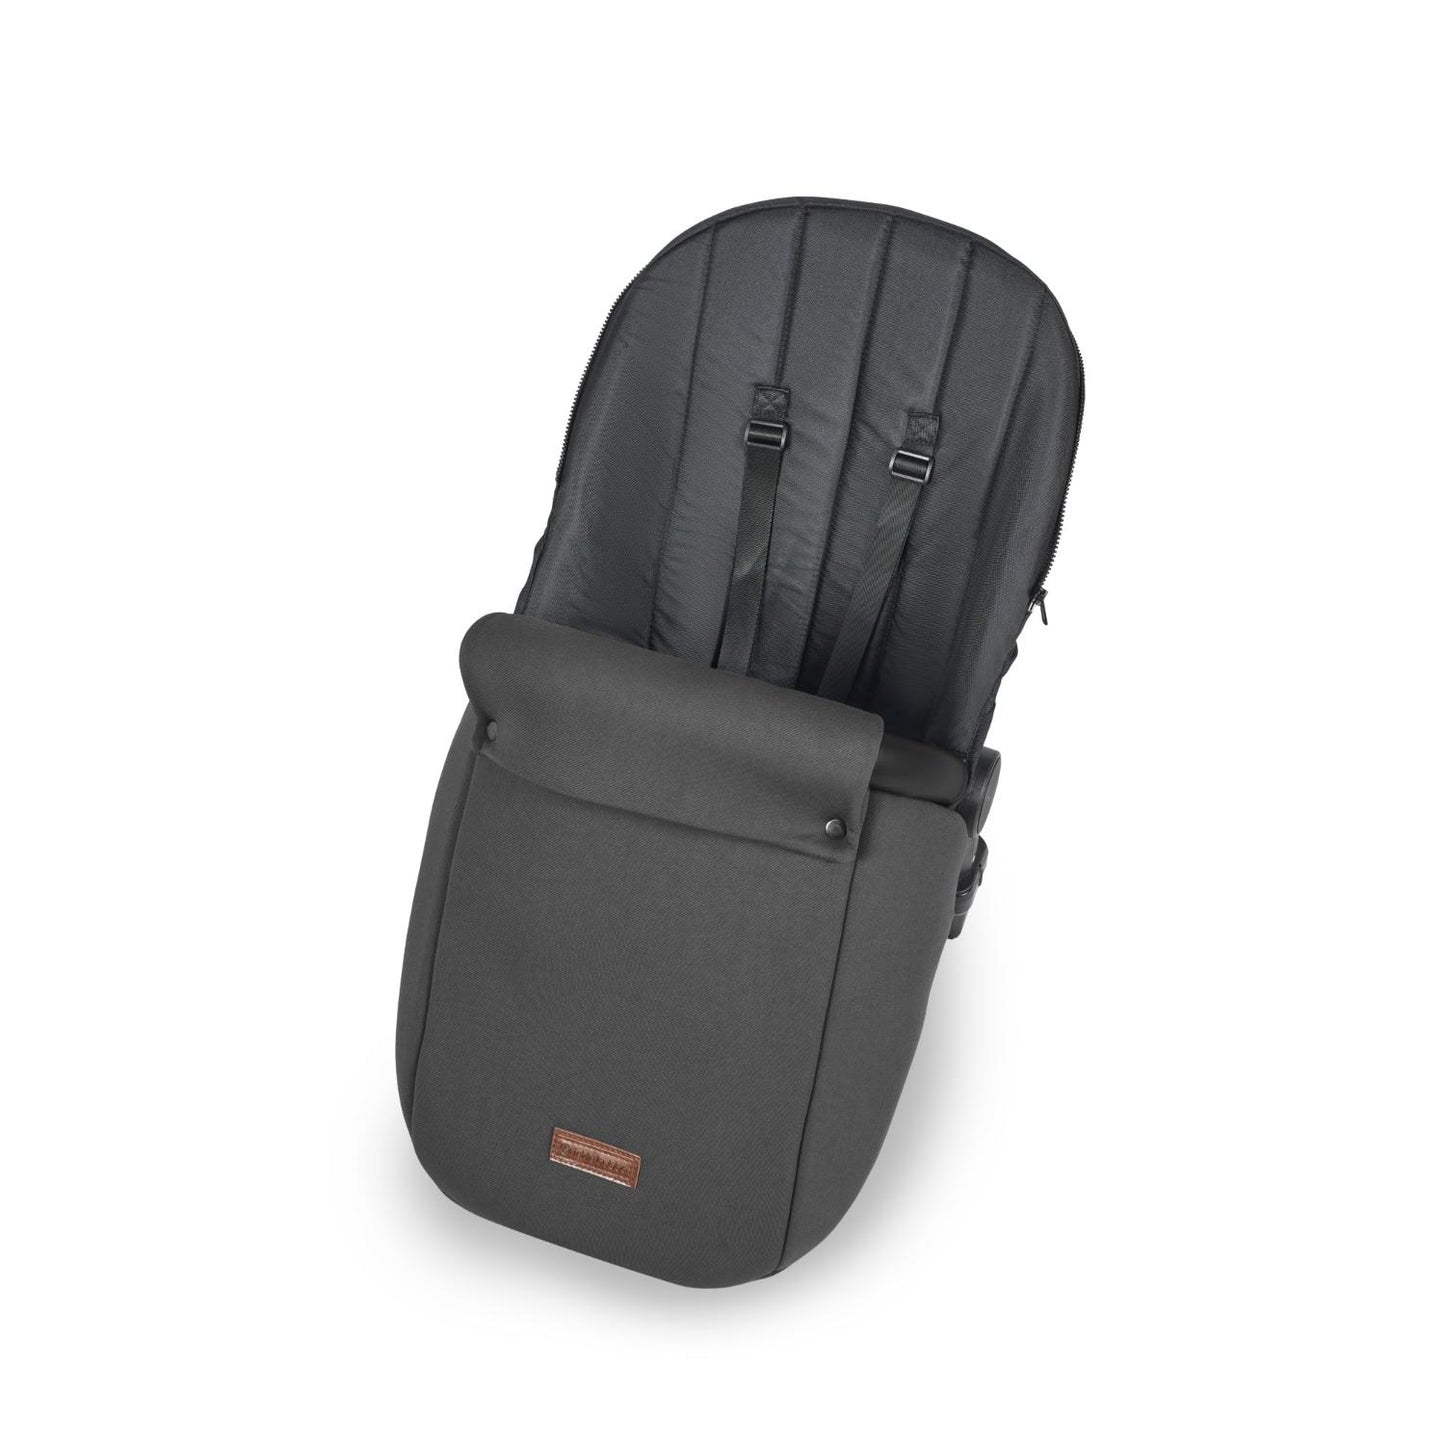 Ickle Bubba Stomp Luxe All-in-One Travel System - Stratus Car Seat + ISOFIX Base